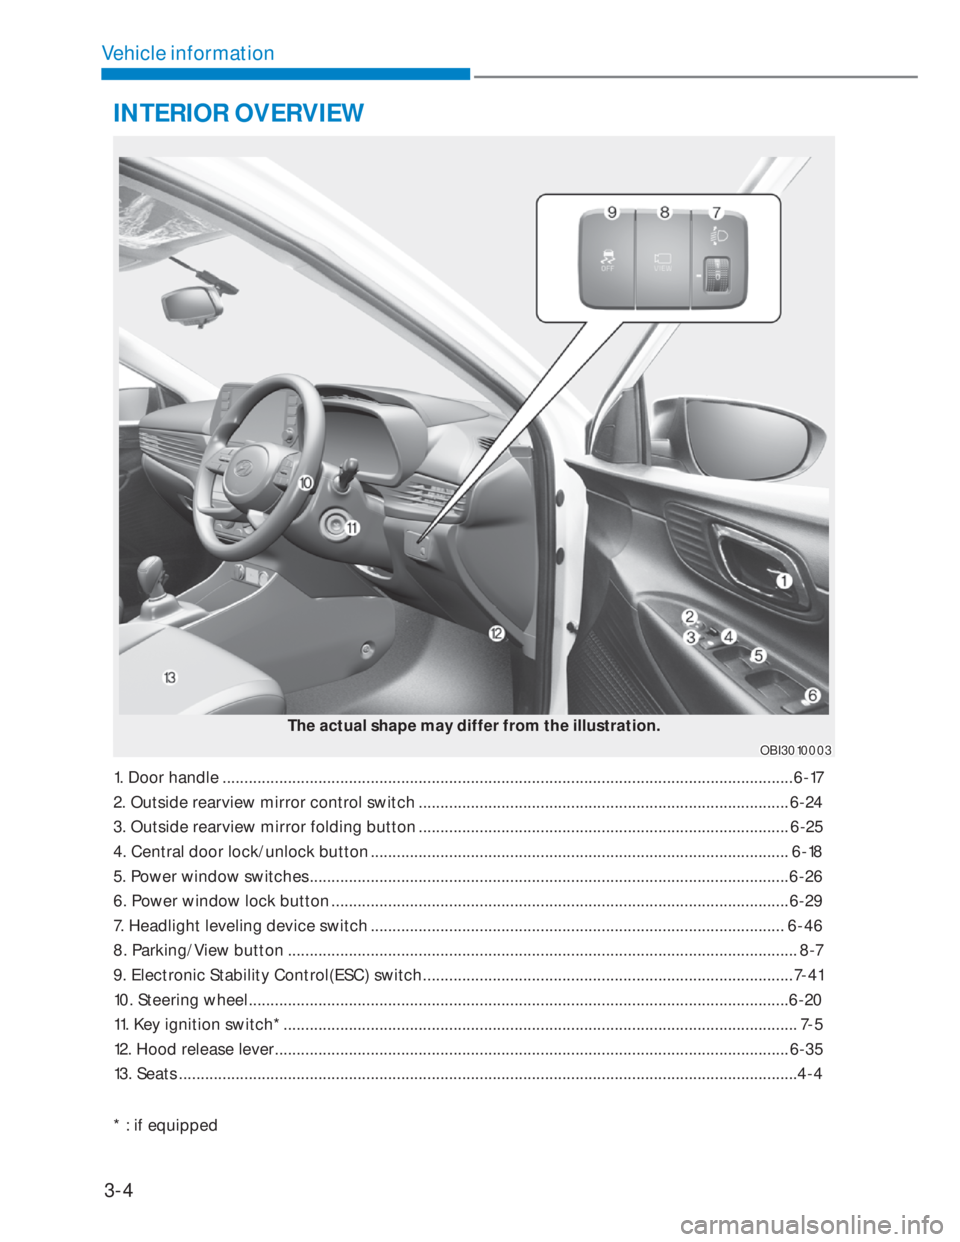 HYUNDAI I20 2022 Owners Manual 3-4
Vehicle information
The actual shape may differ from the illustration.
OBI3010003OBI3010003
INTERIOR OVERVIEW
1. Door handle .......................................................................